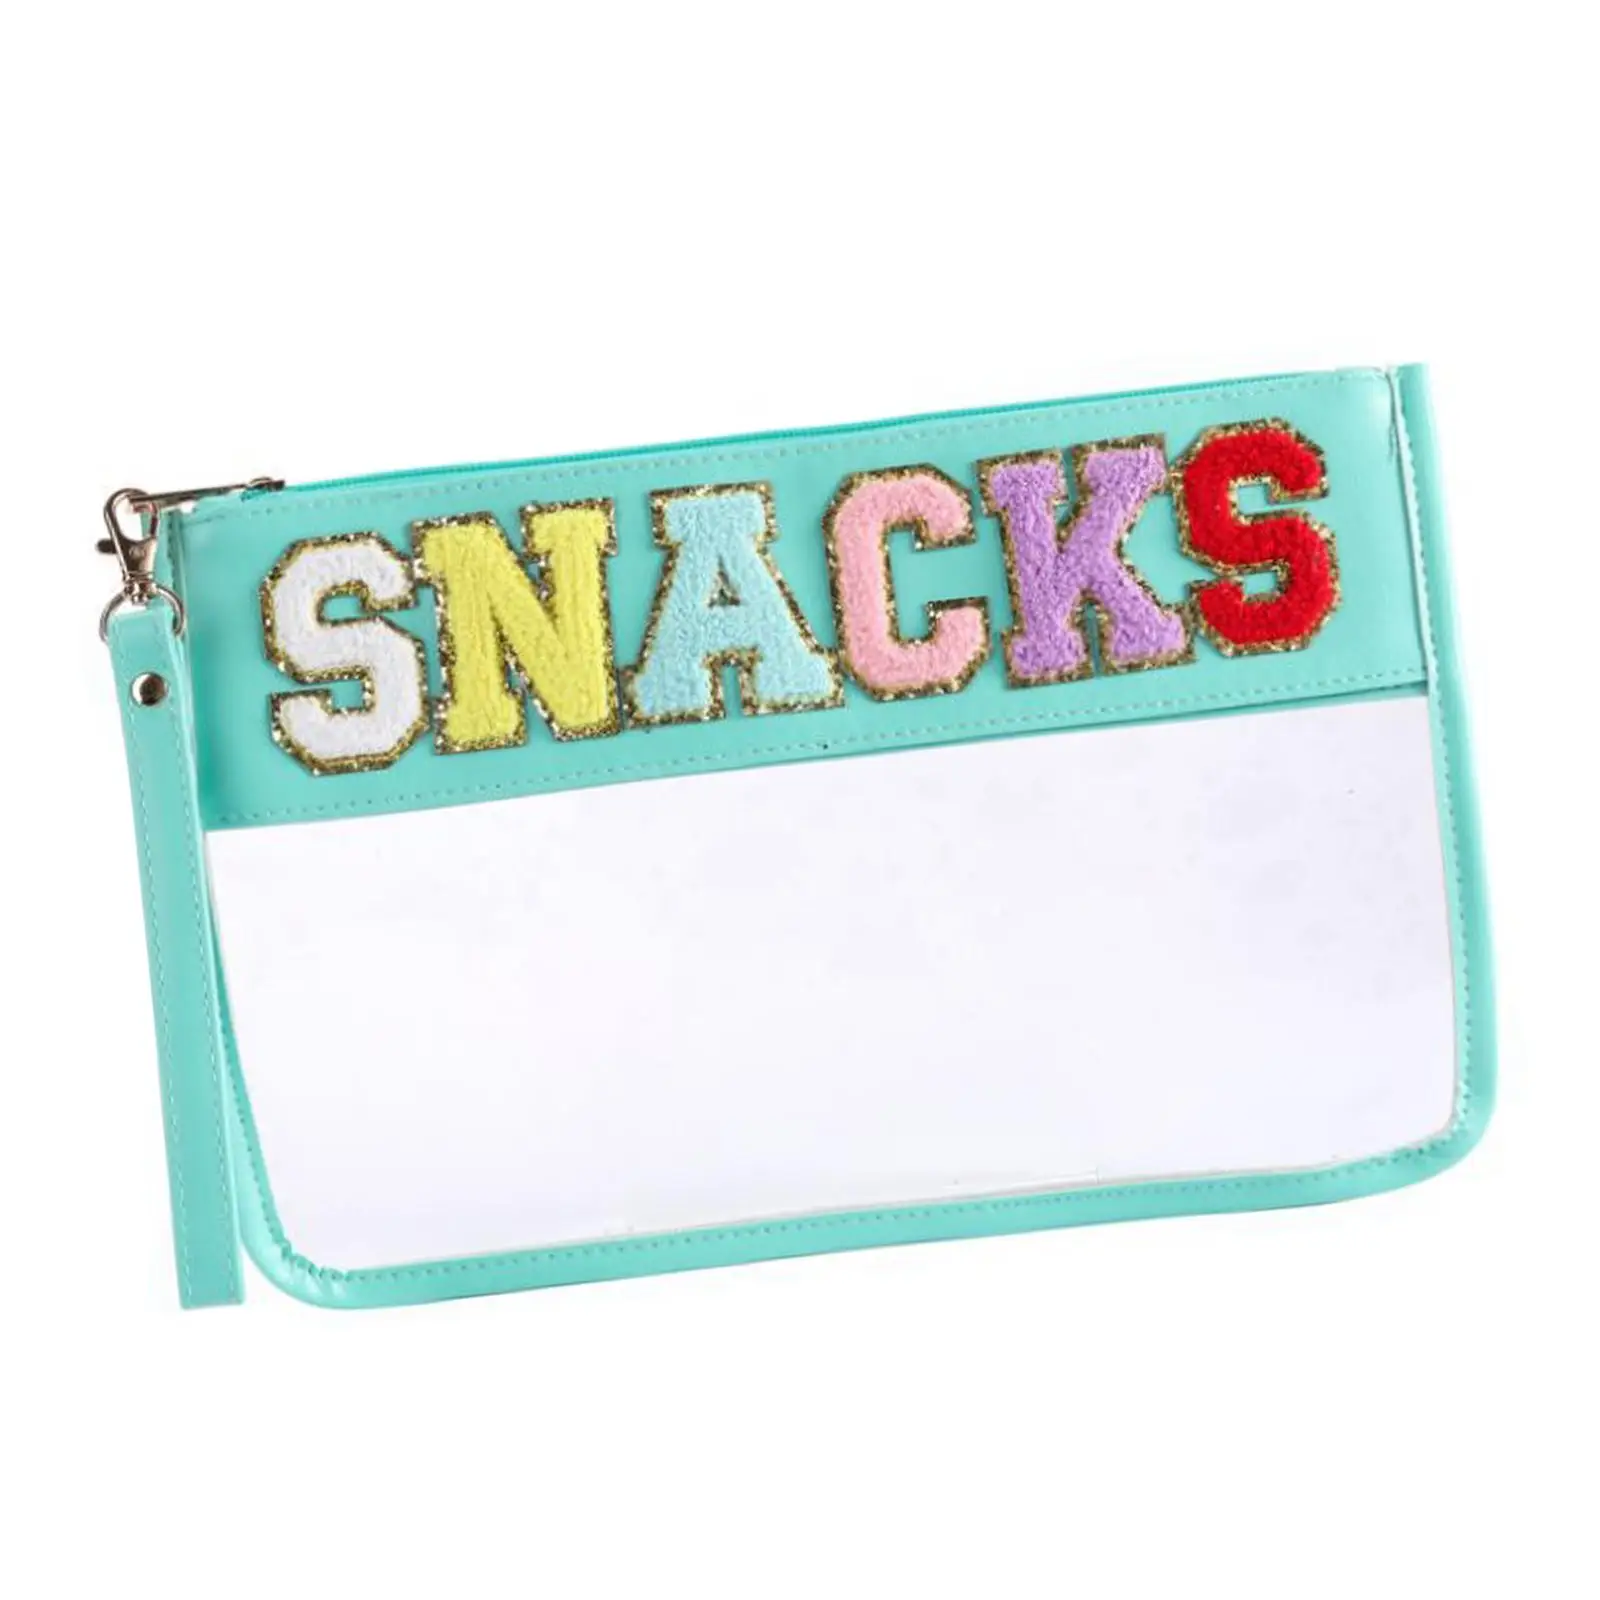 Transparent Cosmetic Bag Snack Bag Reusable Organiser Container with Zipper Wrist Strap Travel Toiletry Bag Clear Makeup Bag